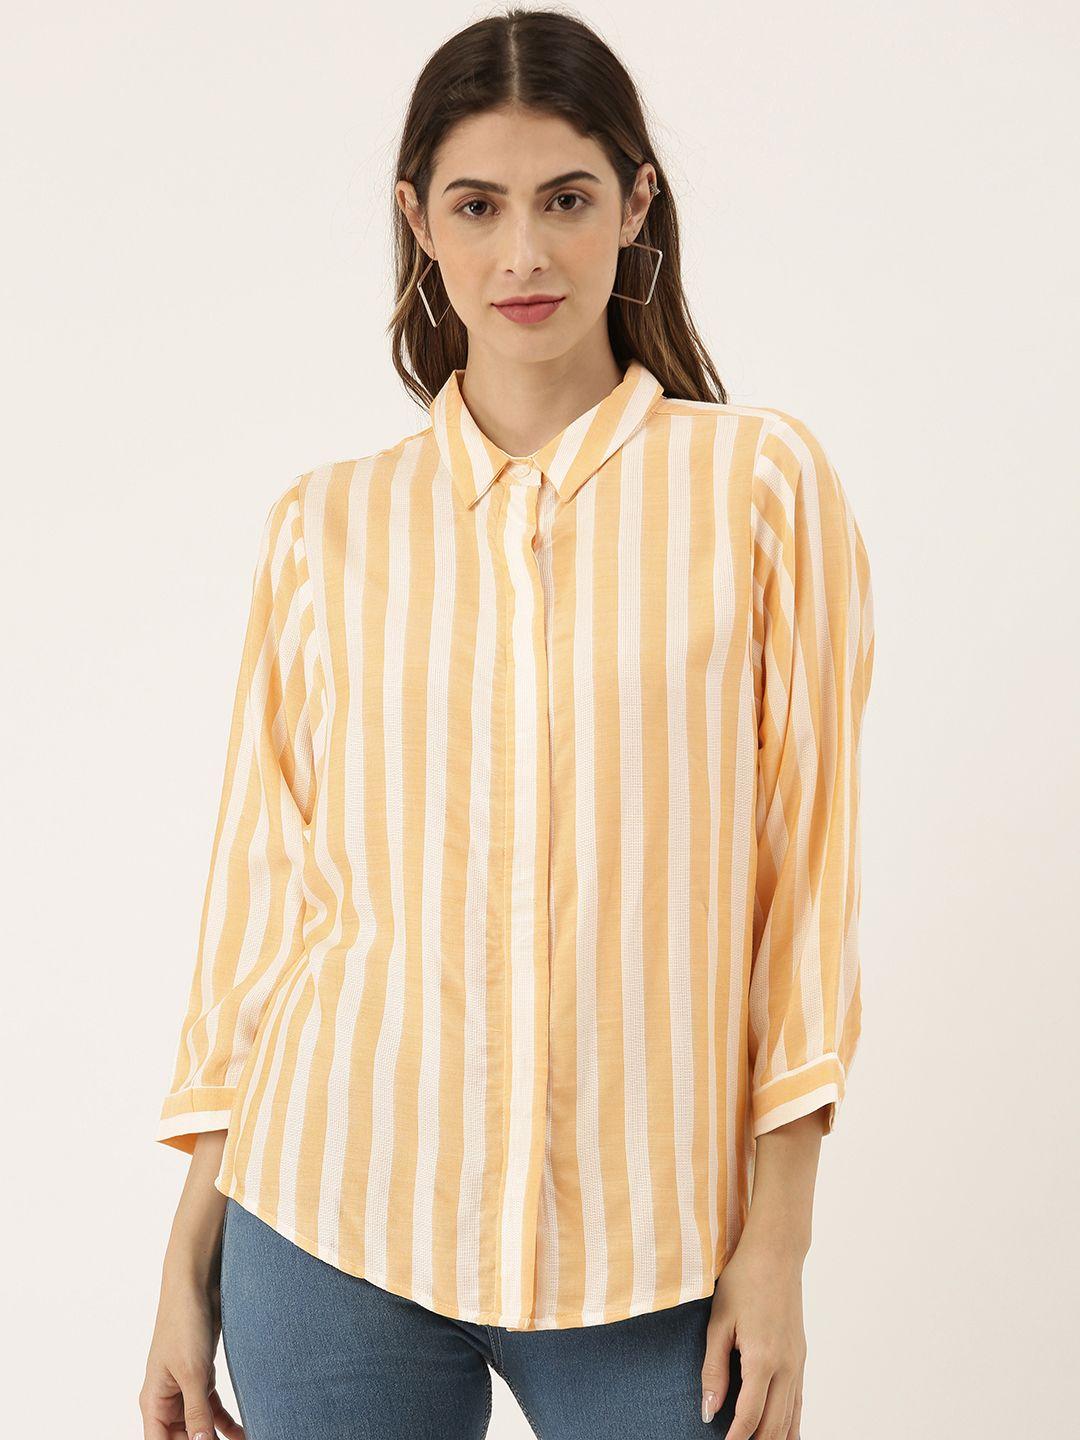 and women off white & coral orange striped shirt style top